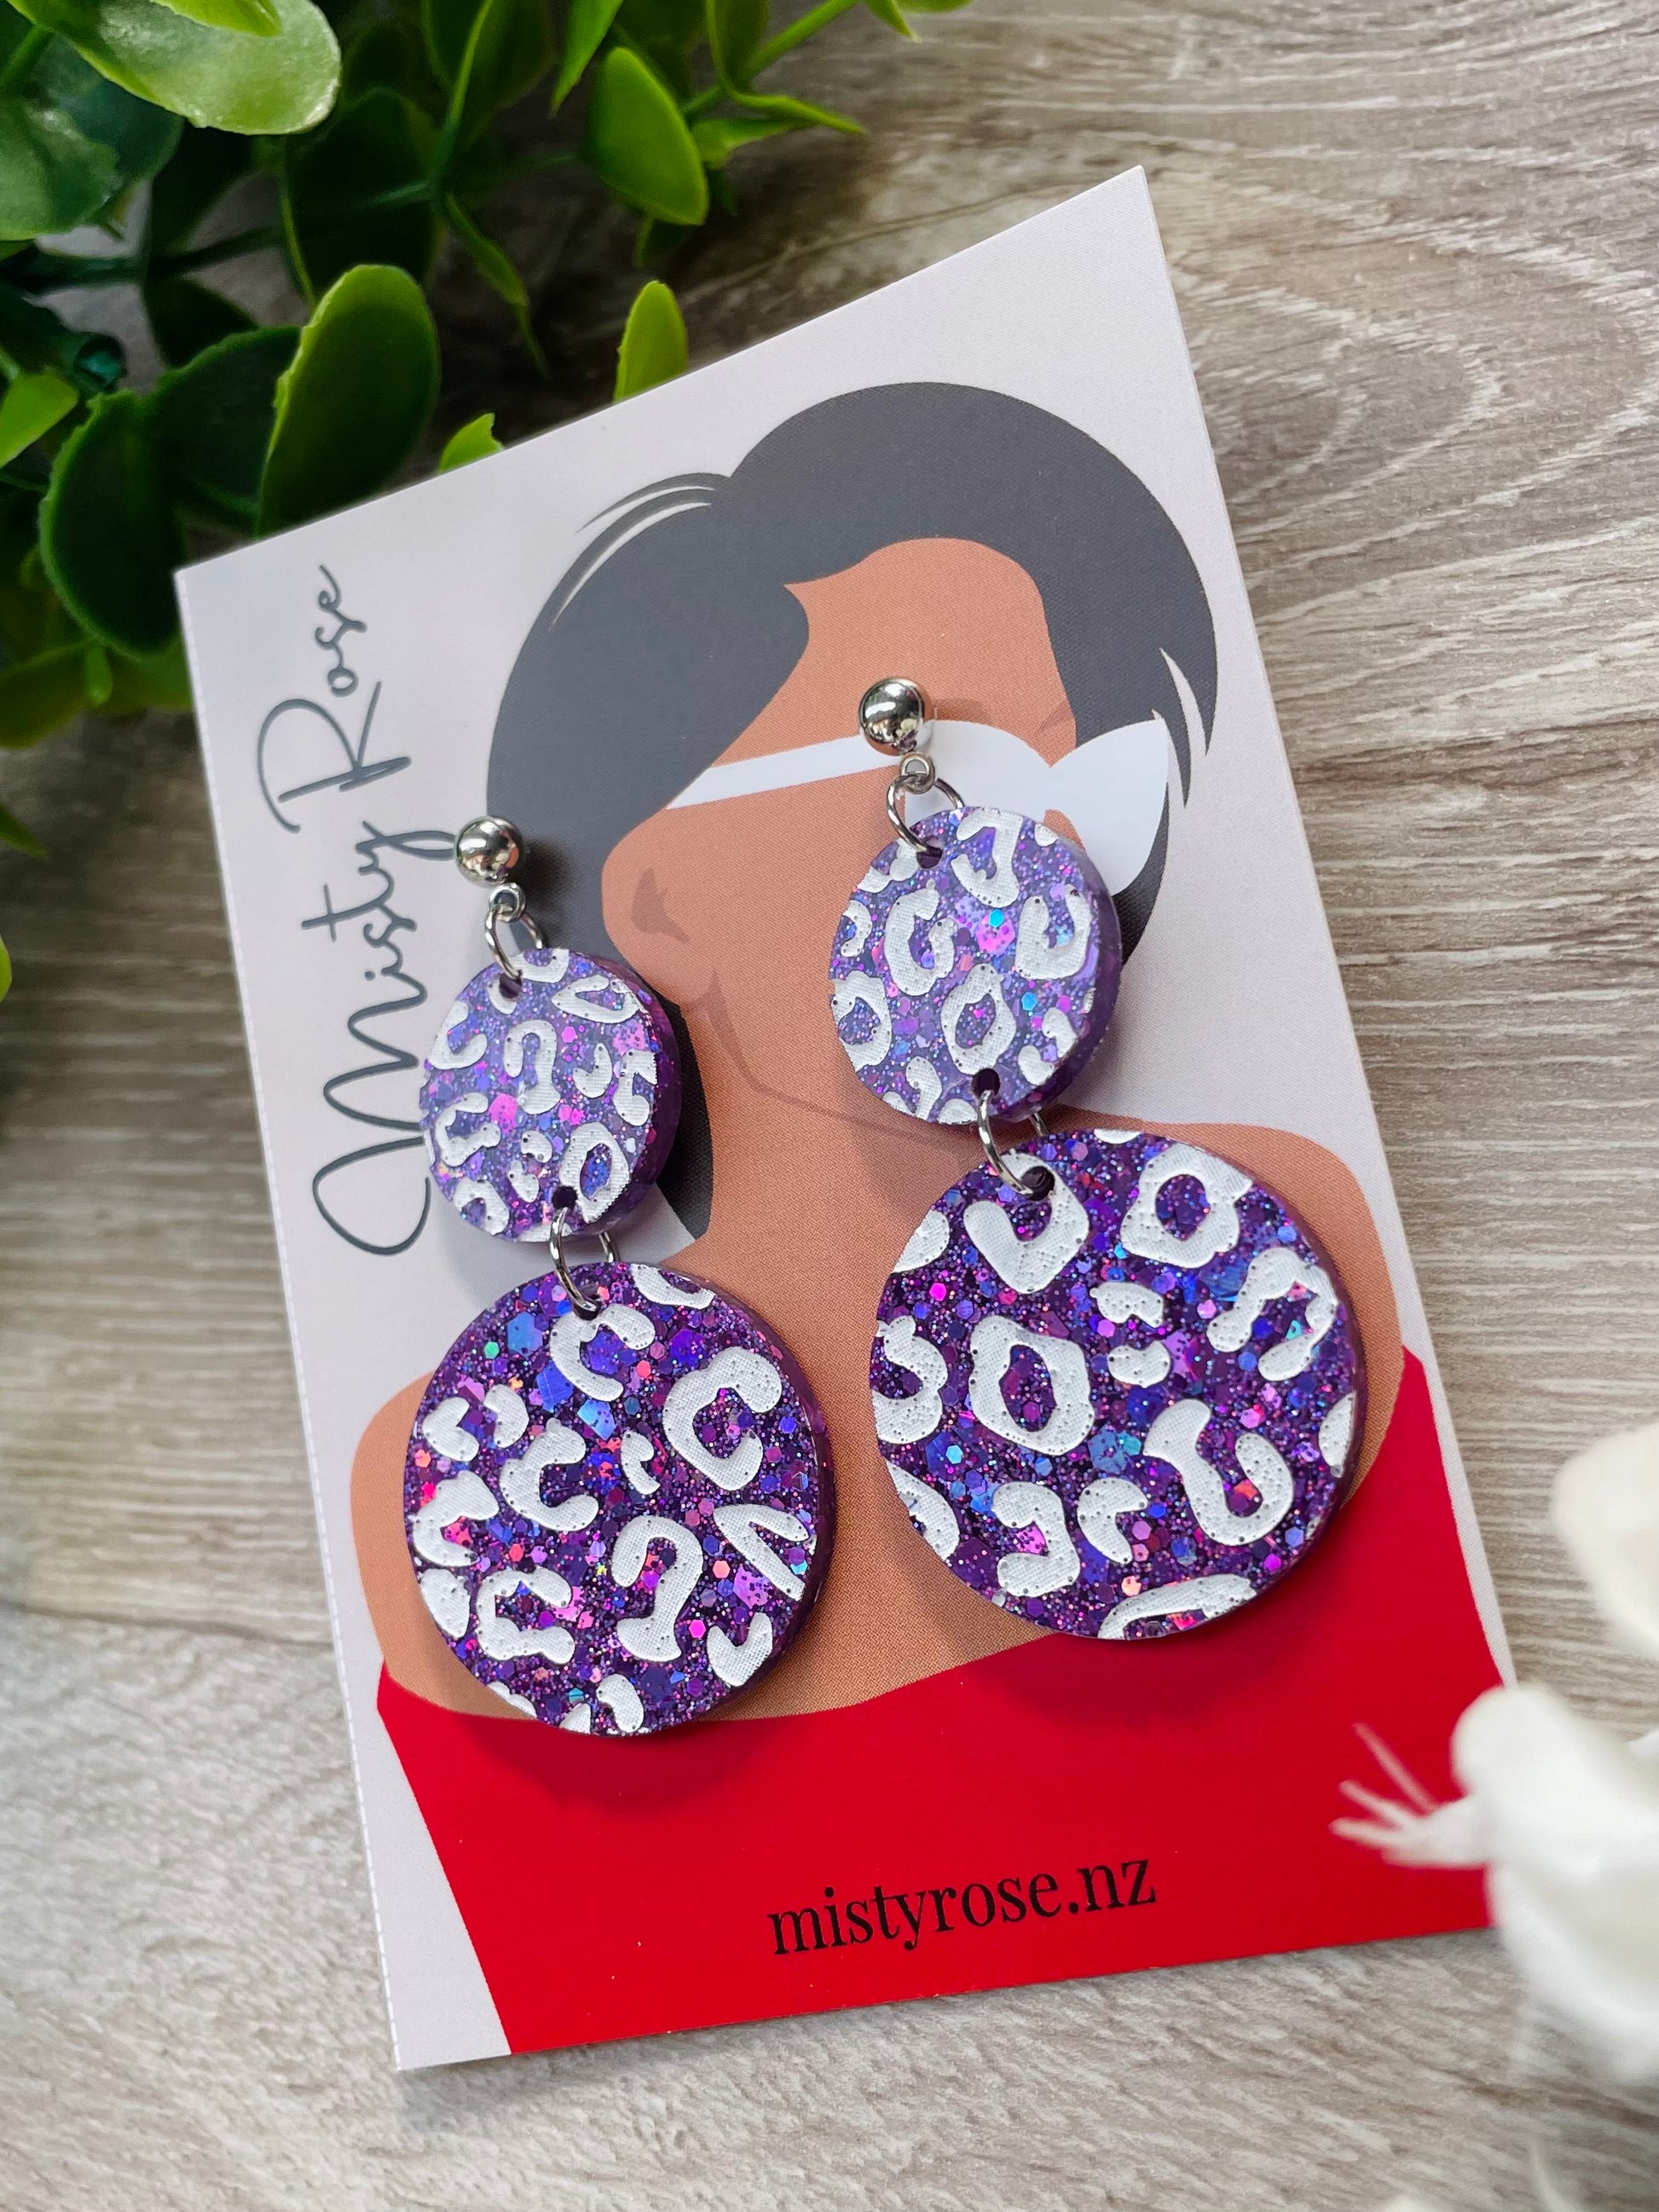 Leopard double circle earrings 🐆🐆  Gorgeous purple holographic glitter with white animal / leopard print detailing 💜  These fun, lightweight earrings are sure to add some sparkle to any look!  Approx 3cm wide x 5cm long with ball stud topper